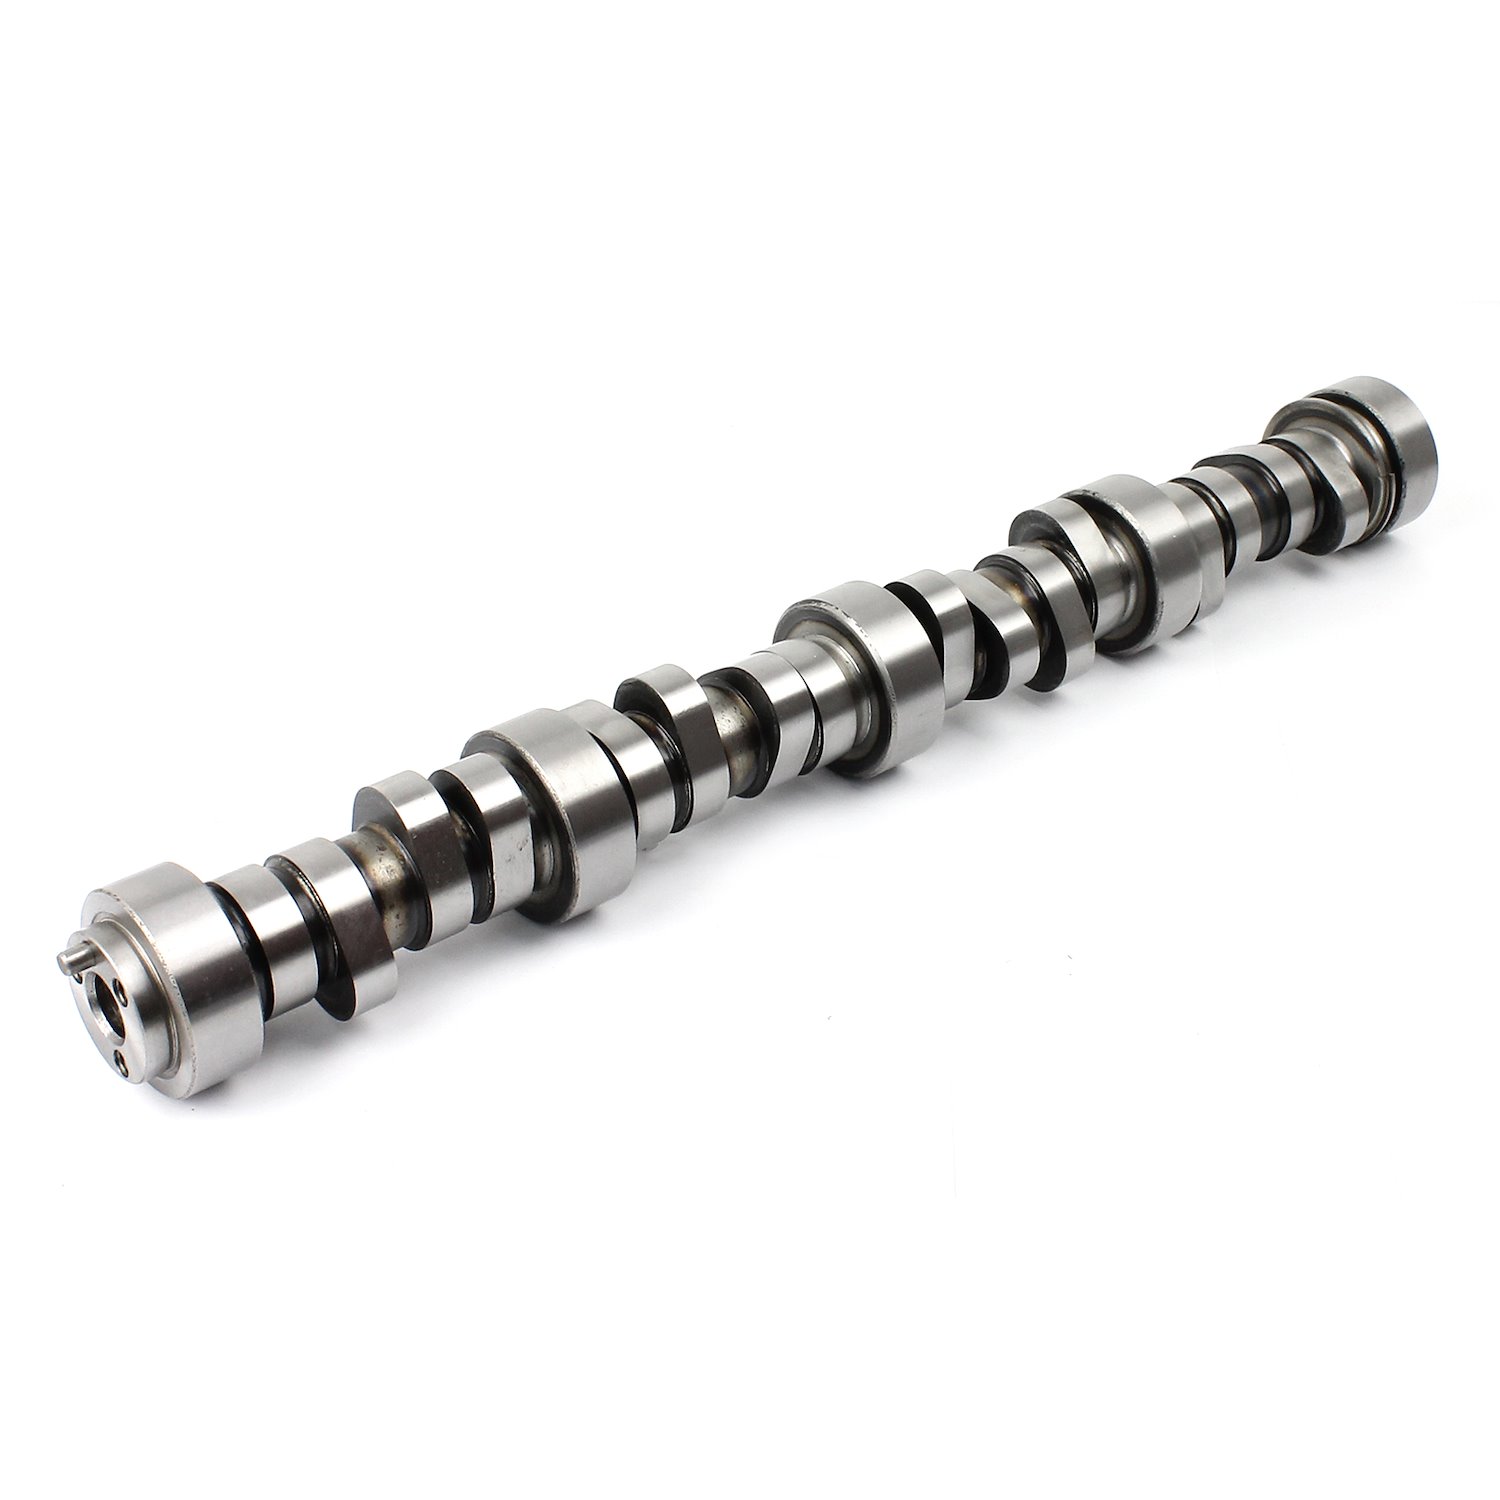 Chevy LS1 LS2 LS6 Hydraulic Roller Tappet Camshaft